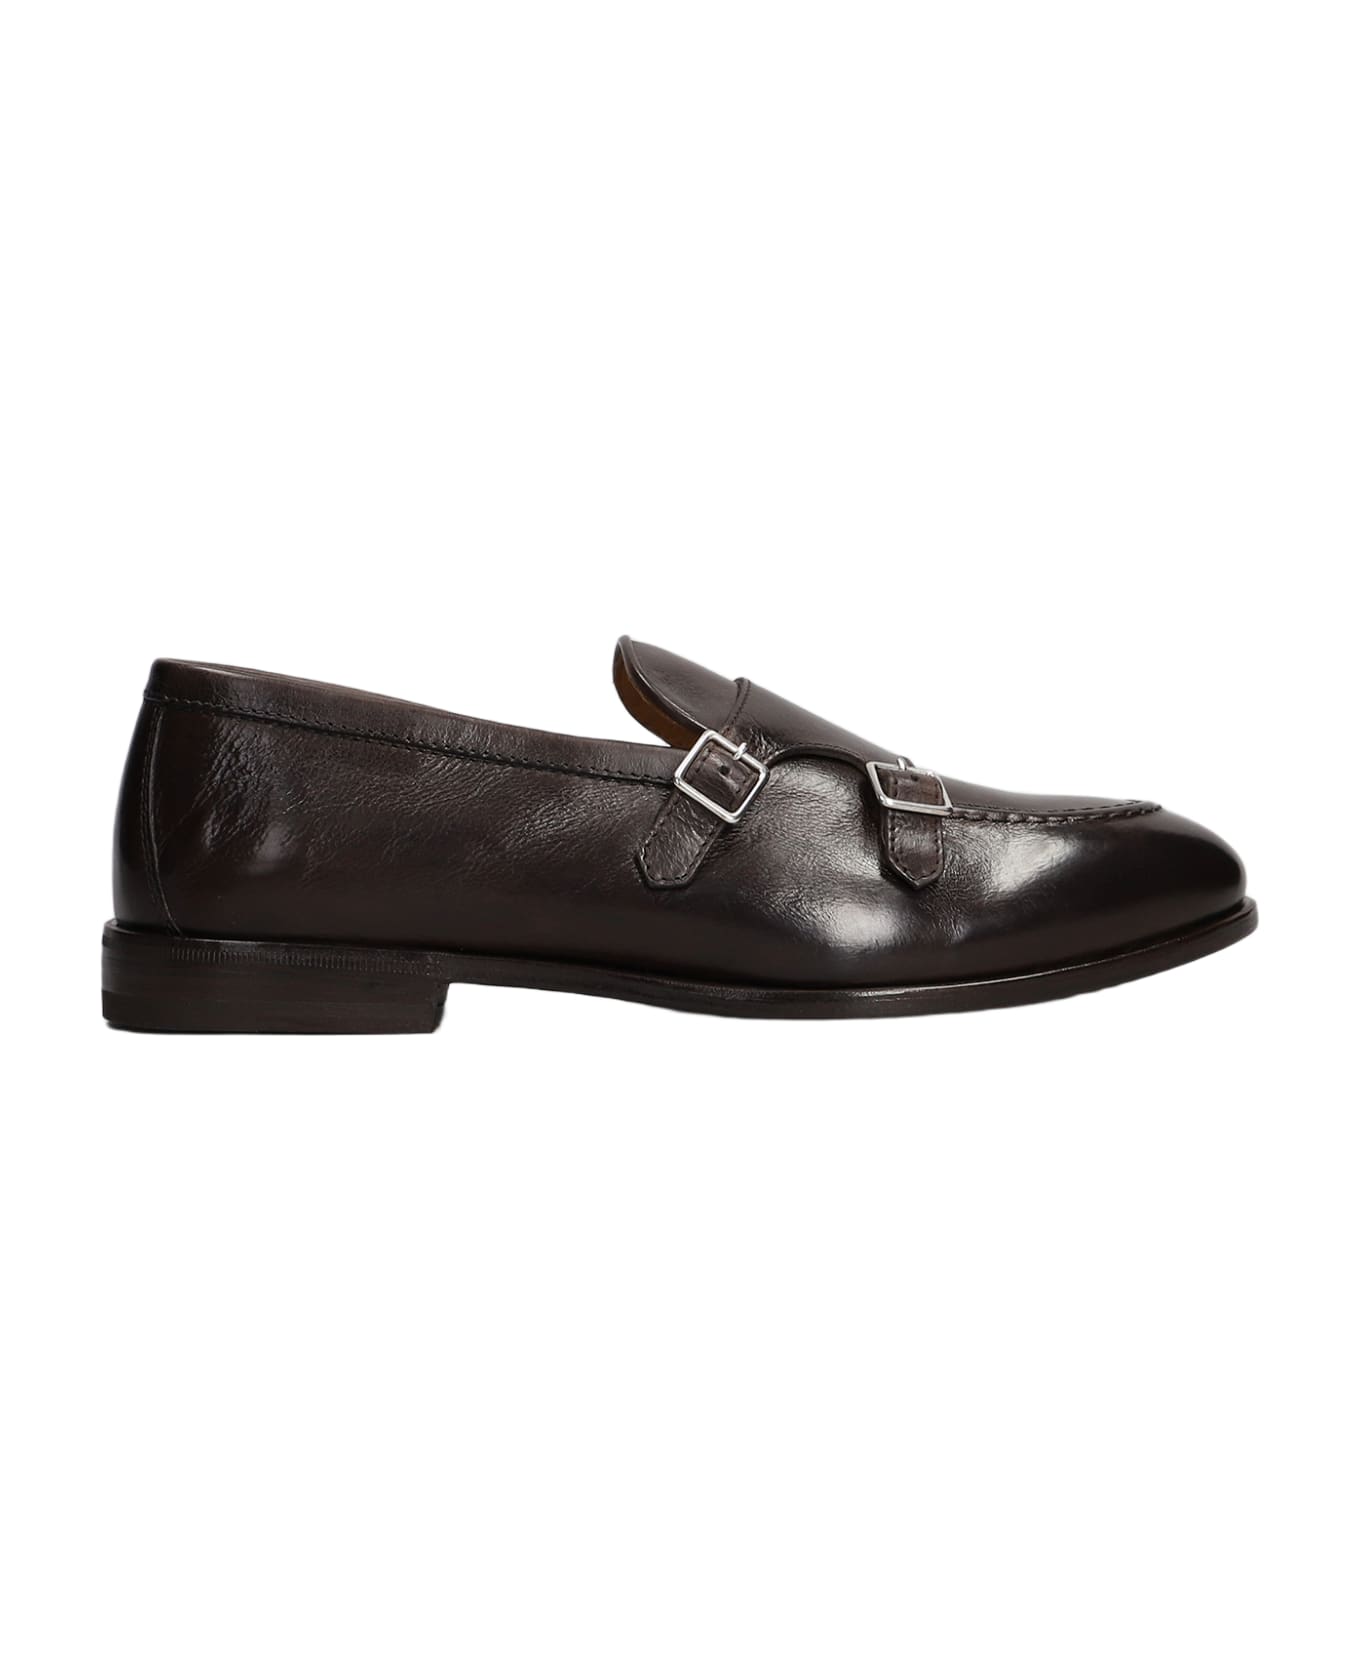 Henderson Baracco Loafers In Brown Leather - brown